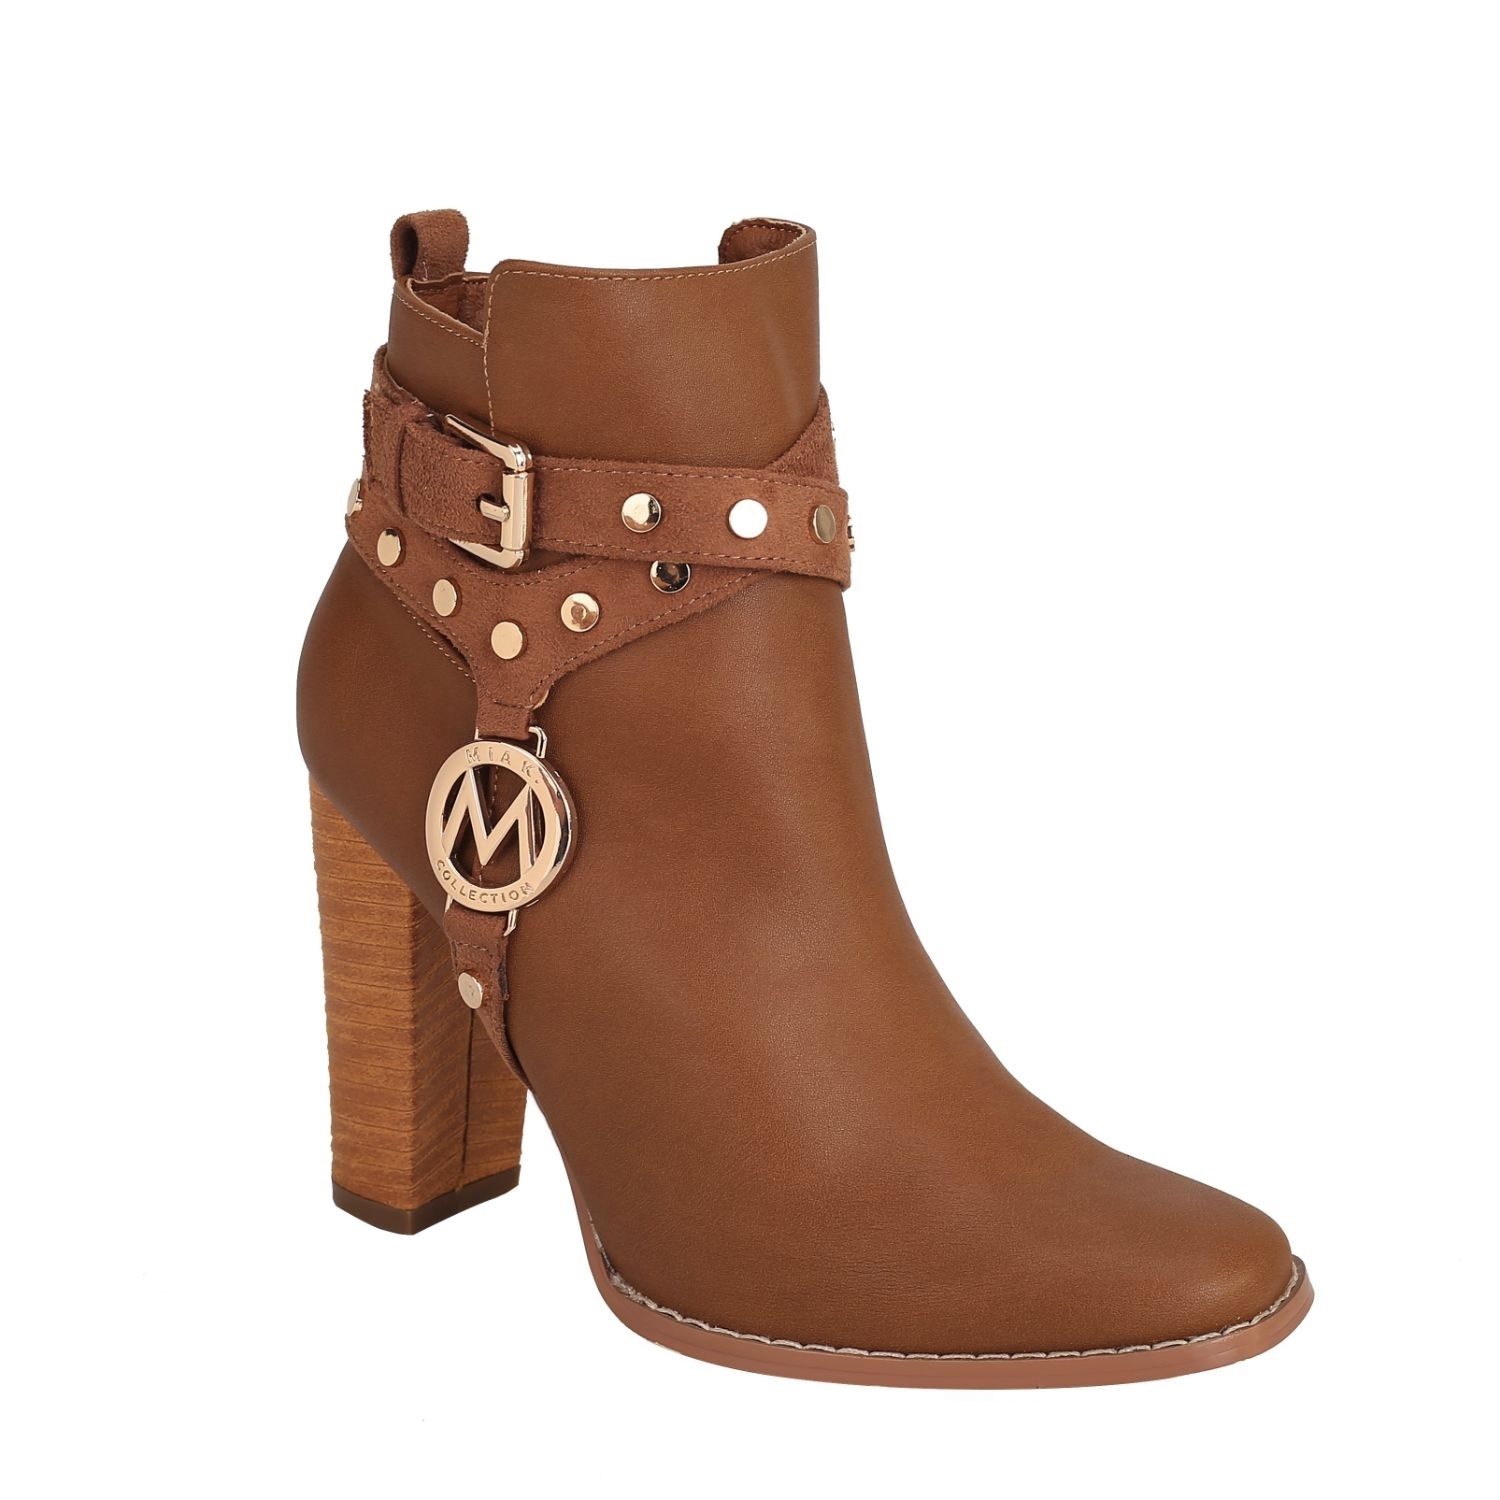 MKF Collection Brooke Ankle Women's Boot With Wide Heel By Mia K - Cognac-7